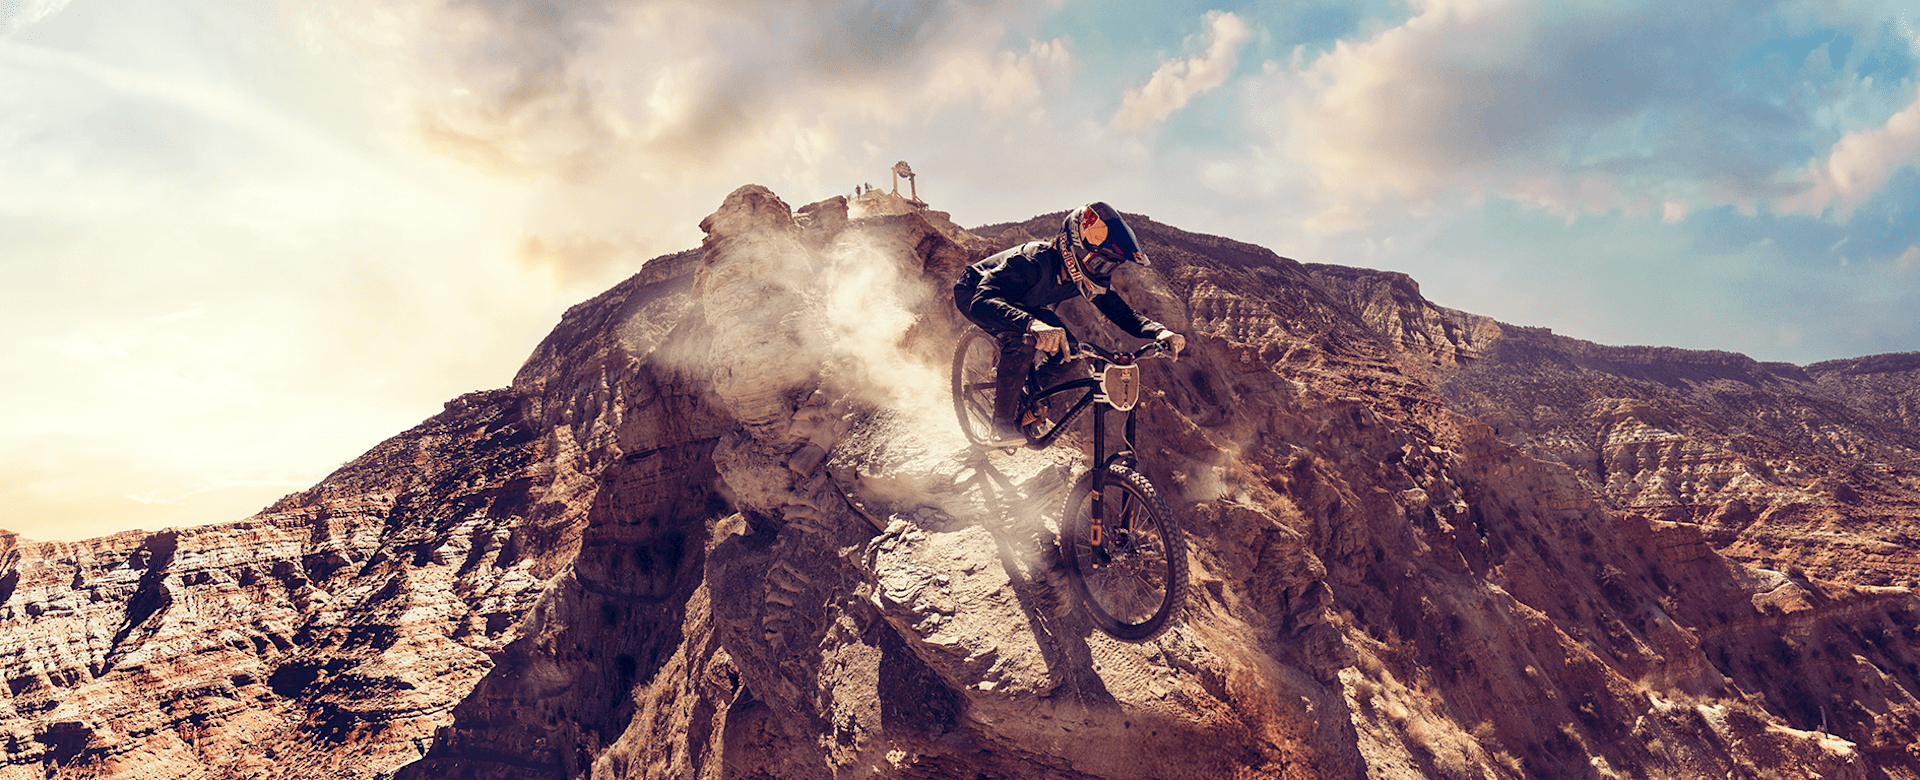 red-bull-rampage-image